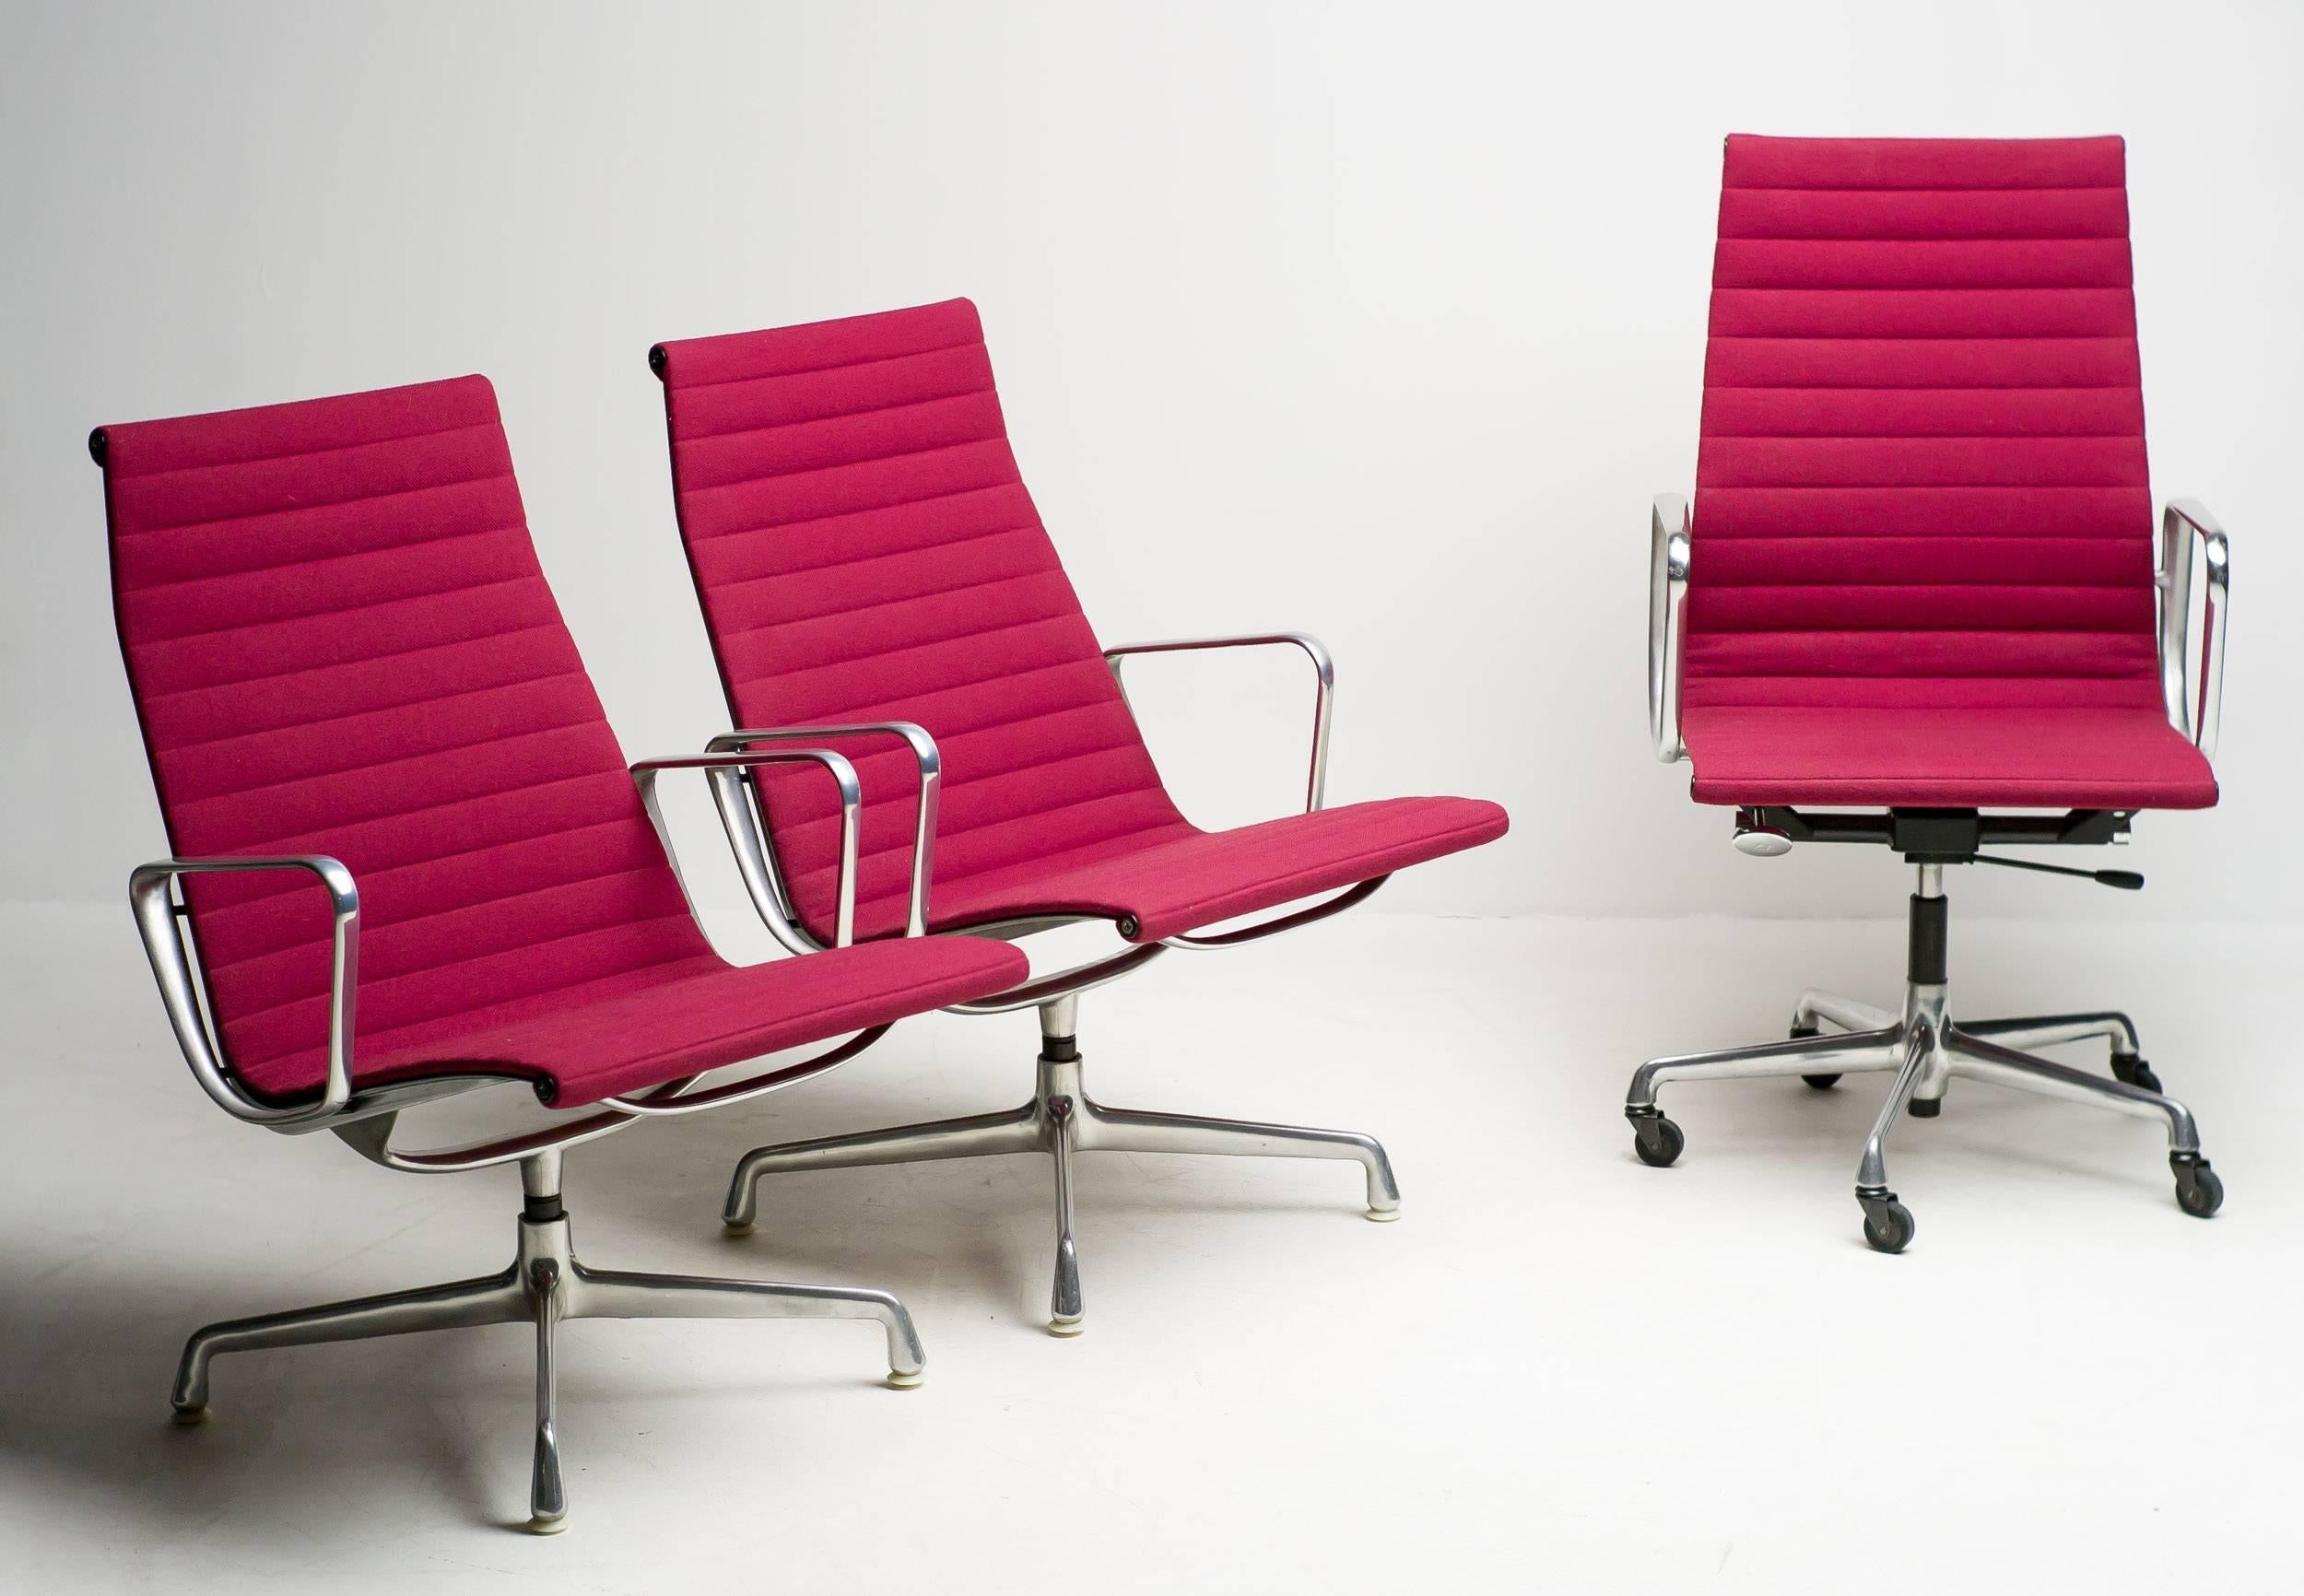 Polished Eames Aluminium Group Chairs in Red